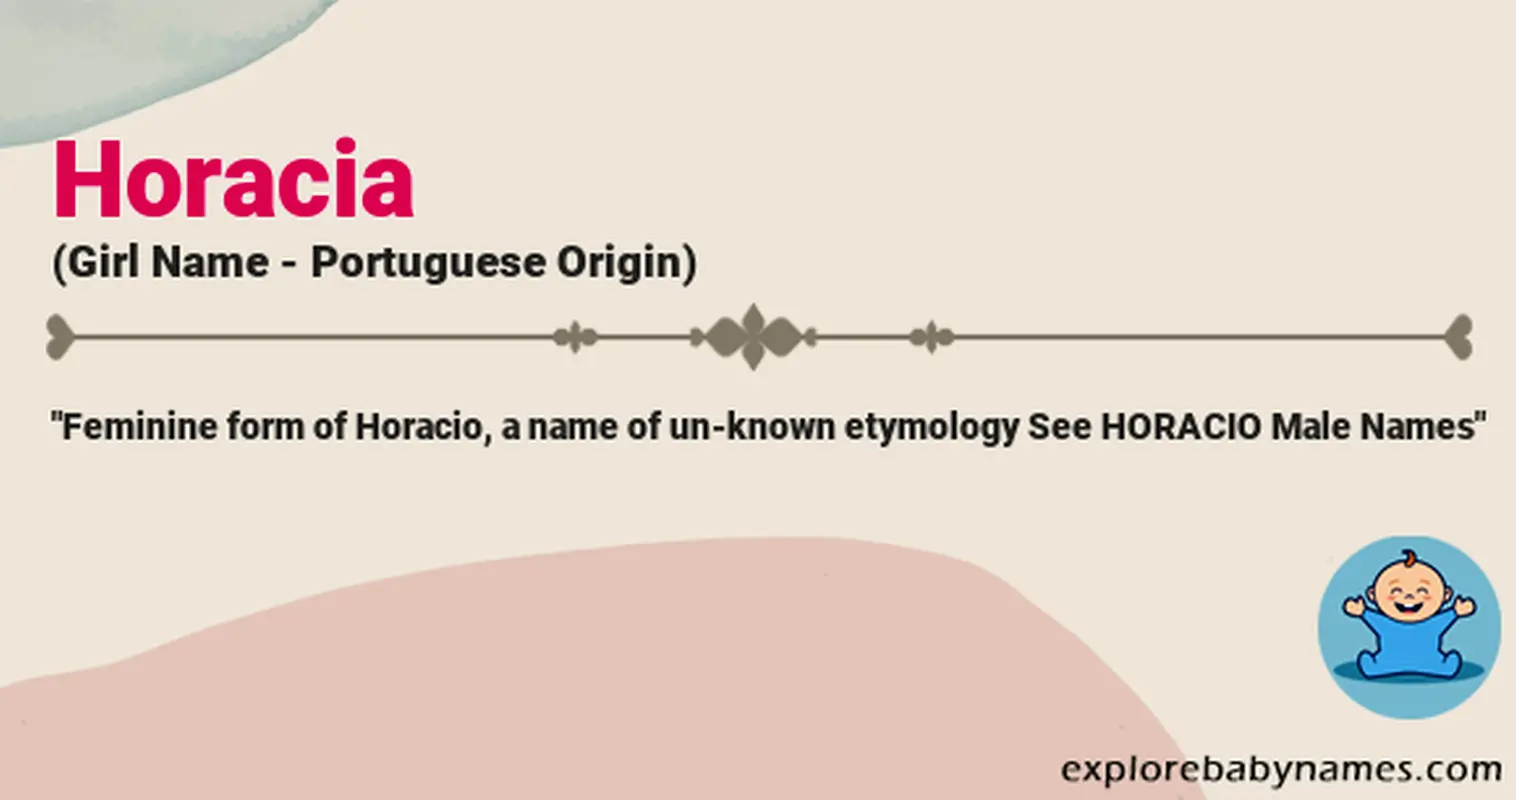 Meaning of Horacia